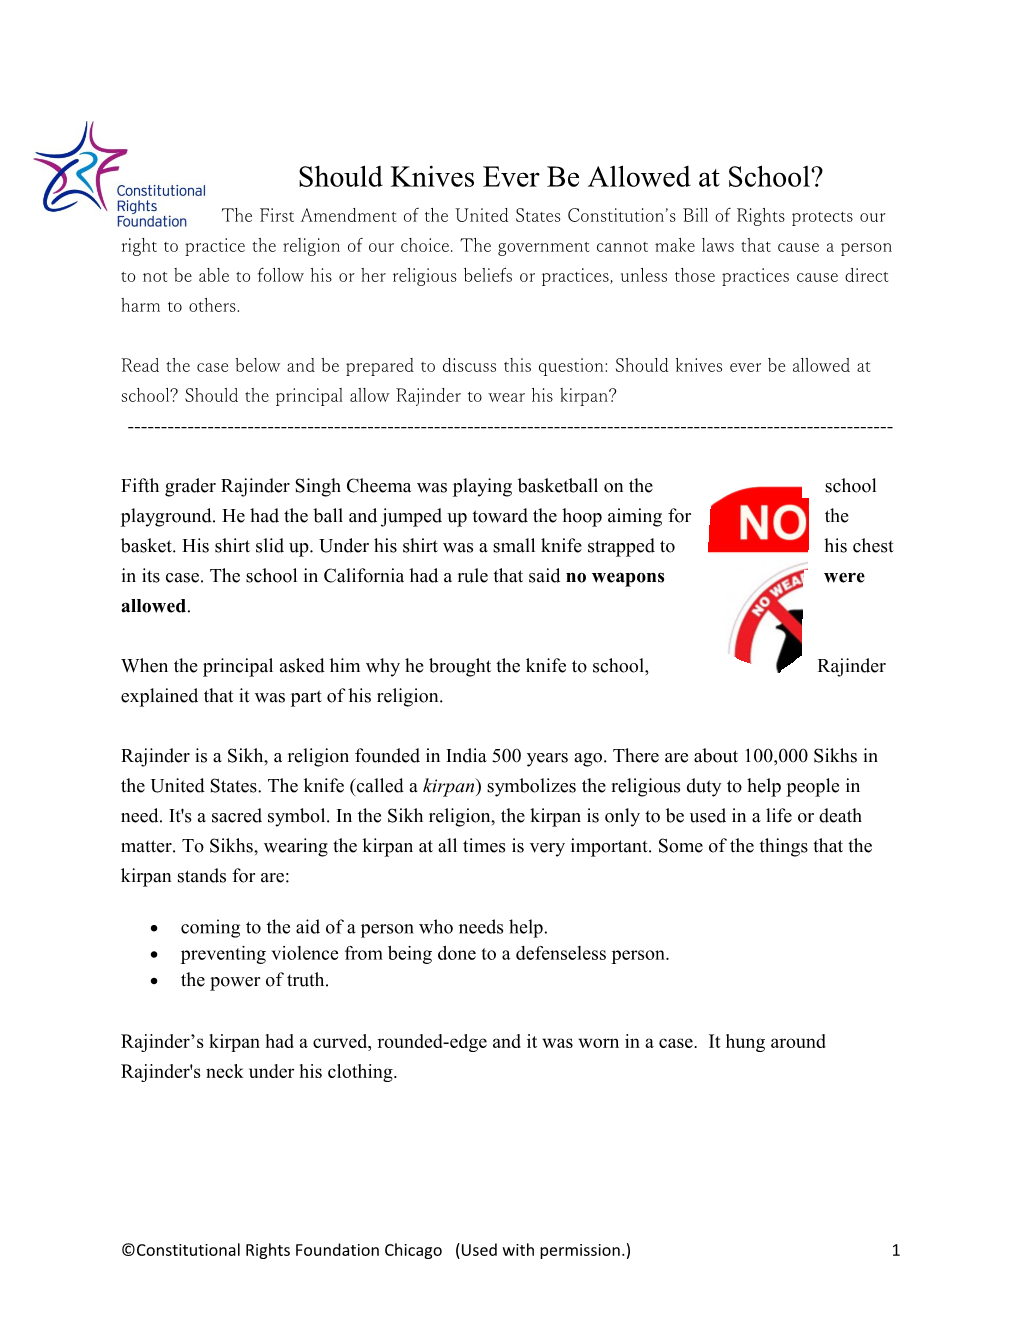 Should Knives Ever Be Allowed at School?